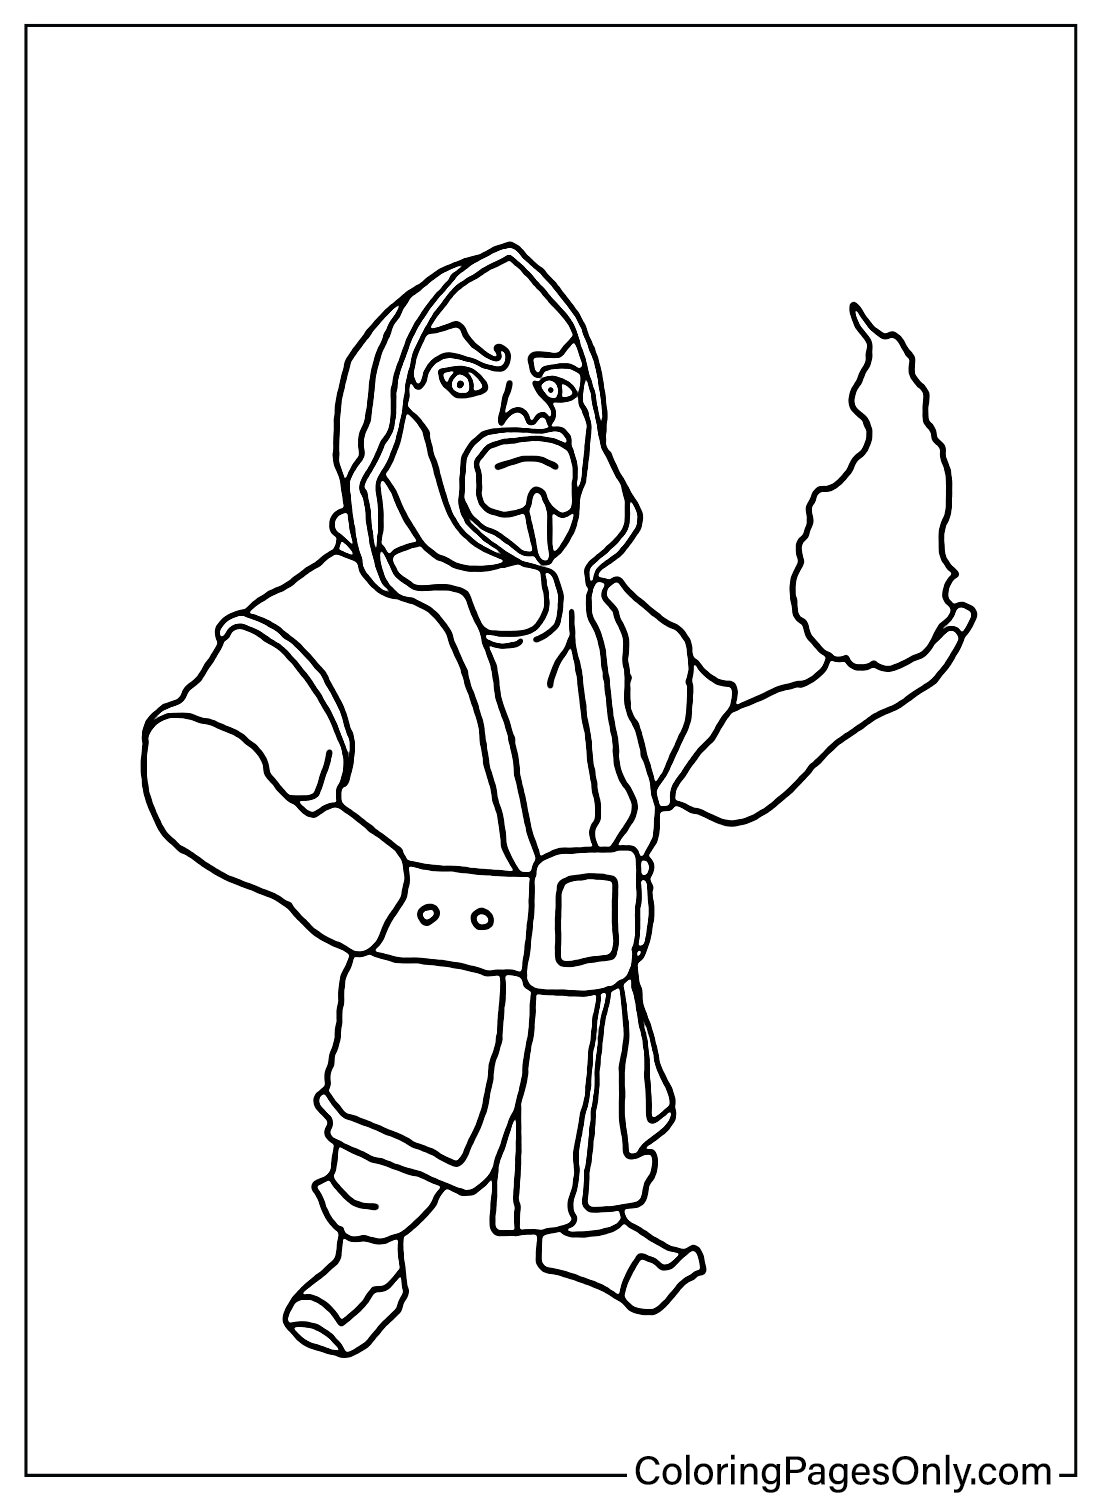 Printable Coloring Page Clash of Clans from Clash of Clans